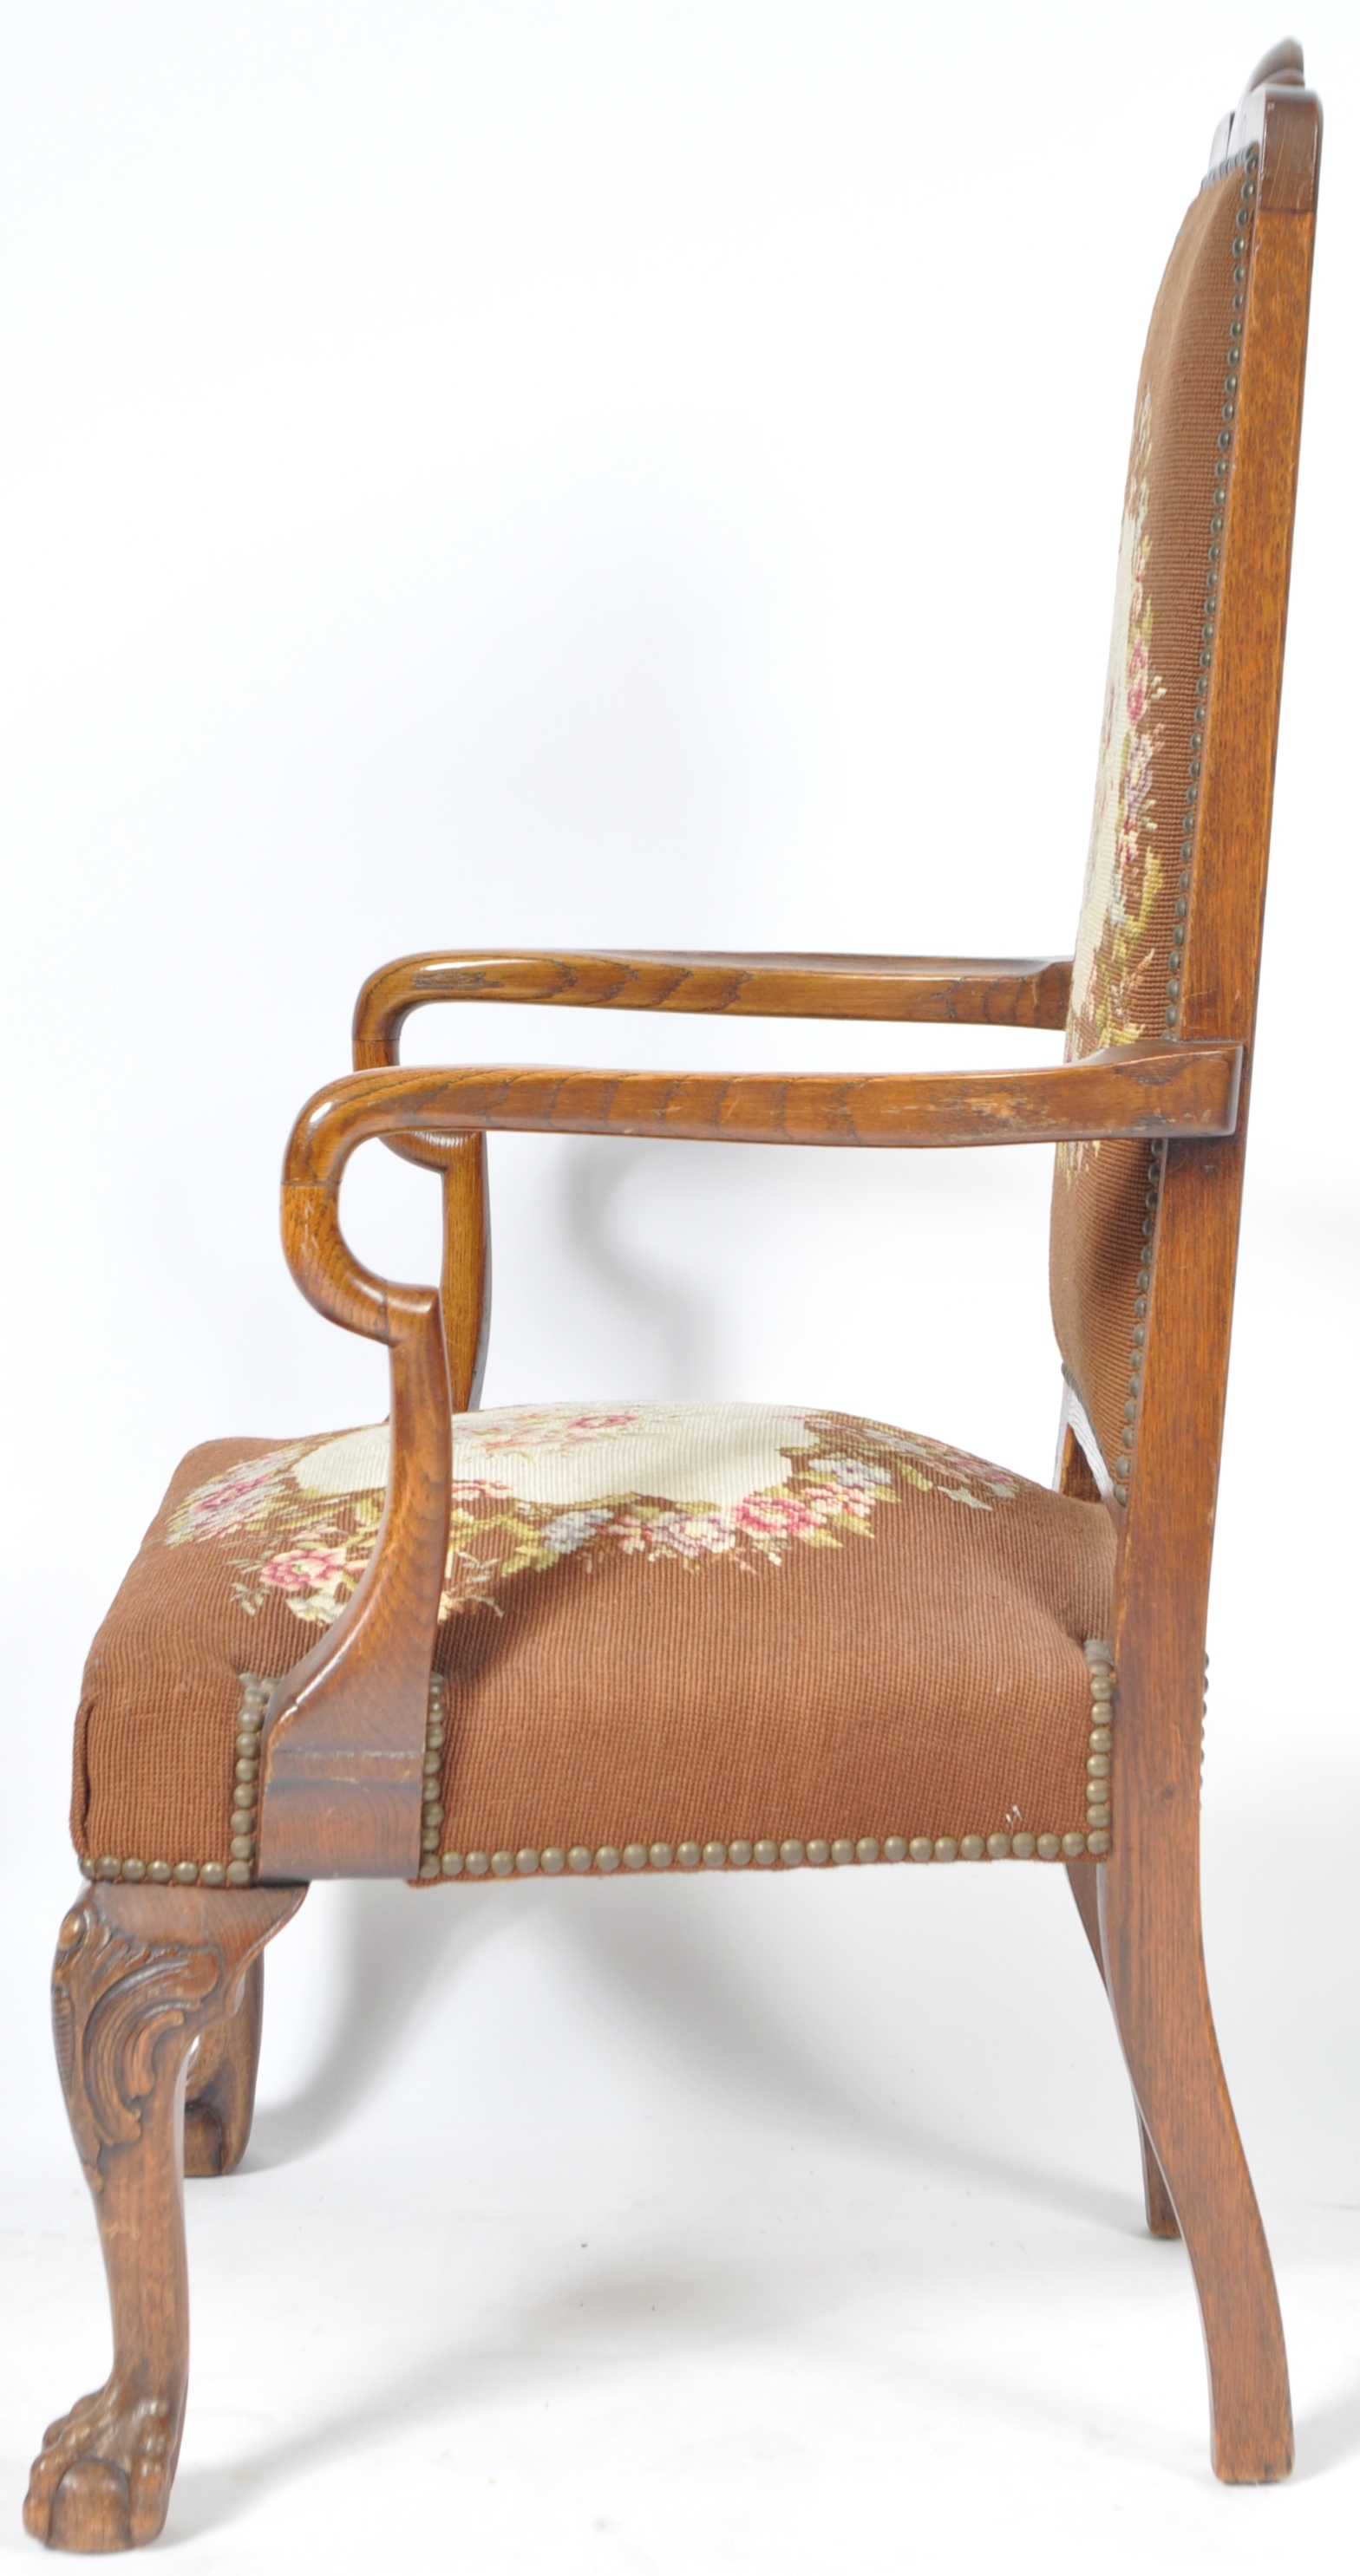 19TH CENTURY QUEEN ANNE REVIVAL OAK TAPESTRY ARMCHAIR - Image 8 of 8